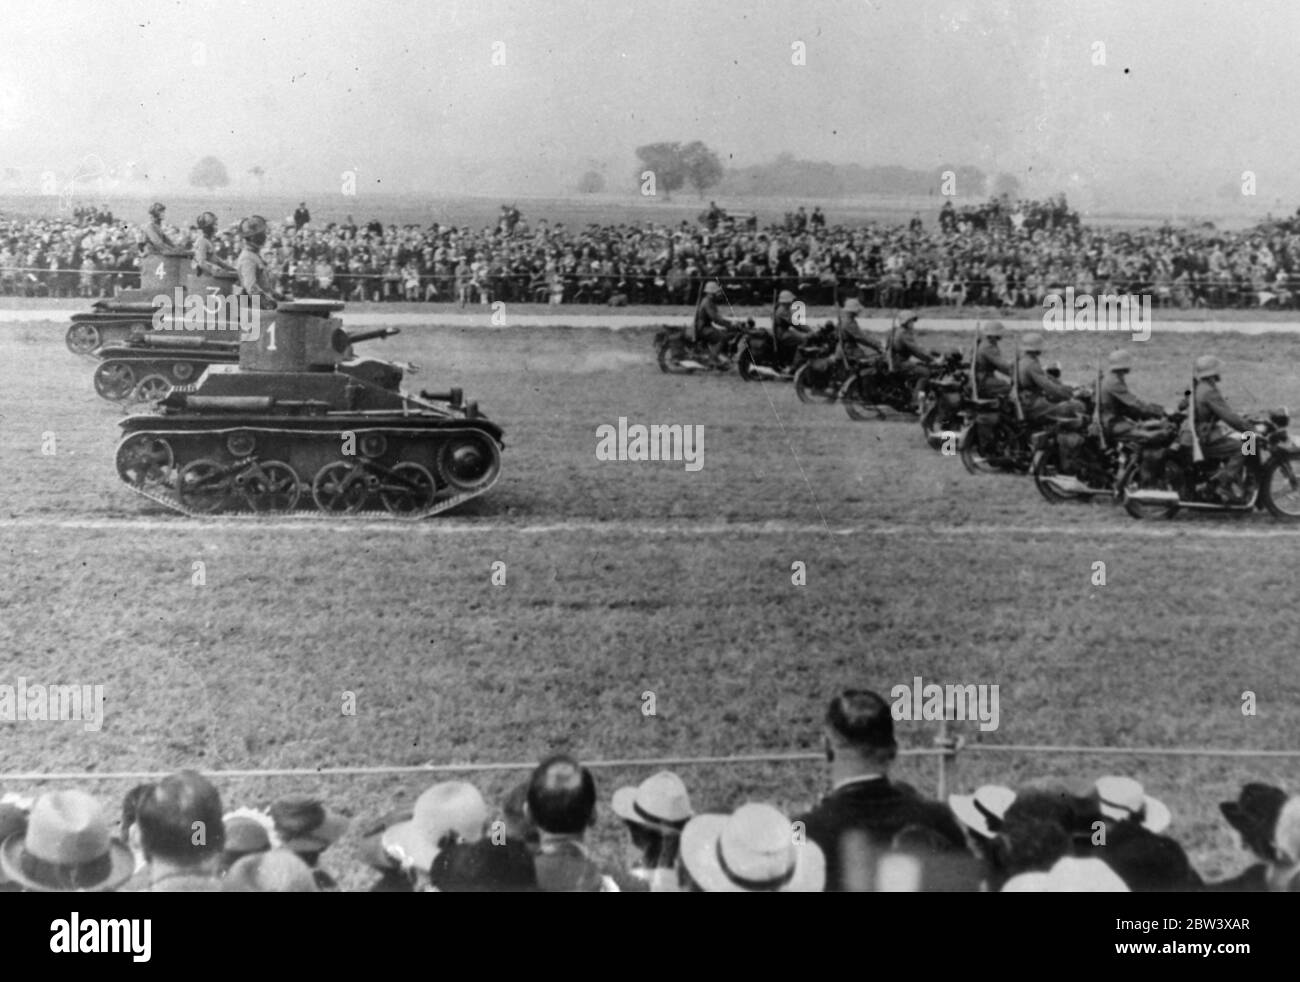 Switzerland ' s up to date army on parade . The efficiency of Switzerland ' s highly mechanised army was demonstrated when the 2 Division marched past military chiefs near Utzendorf in connection with the Swiss Army manoeuvres . Photo shows , tanks and motorcycle troops in the parade . 12 September 1936 Stock Photo